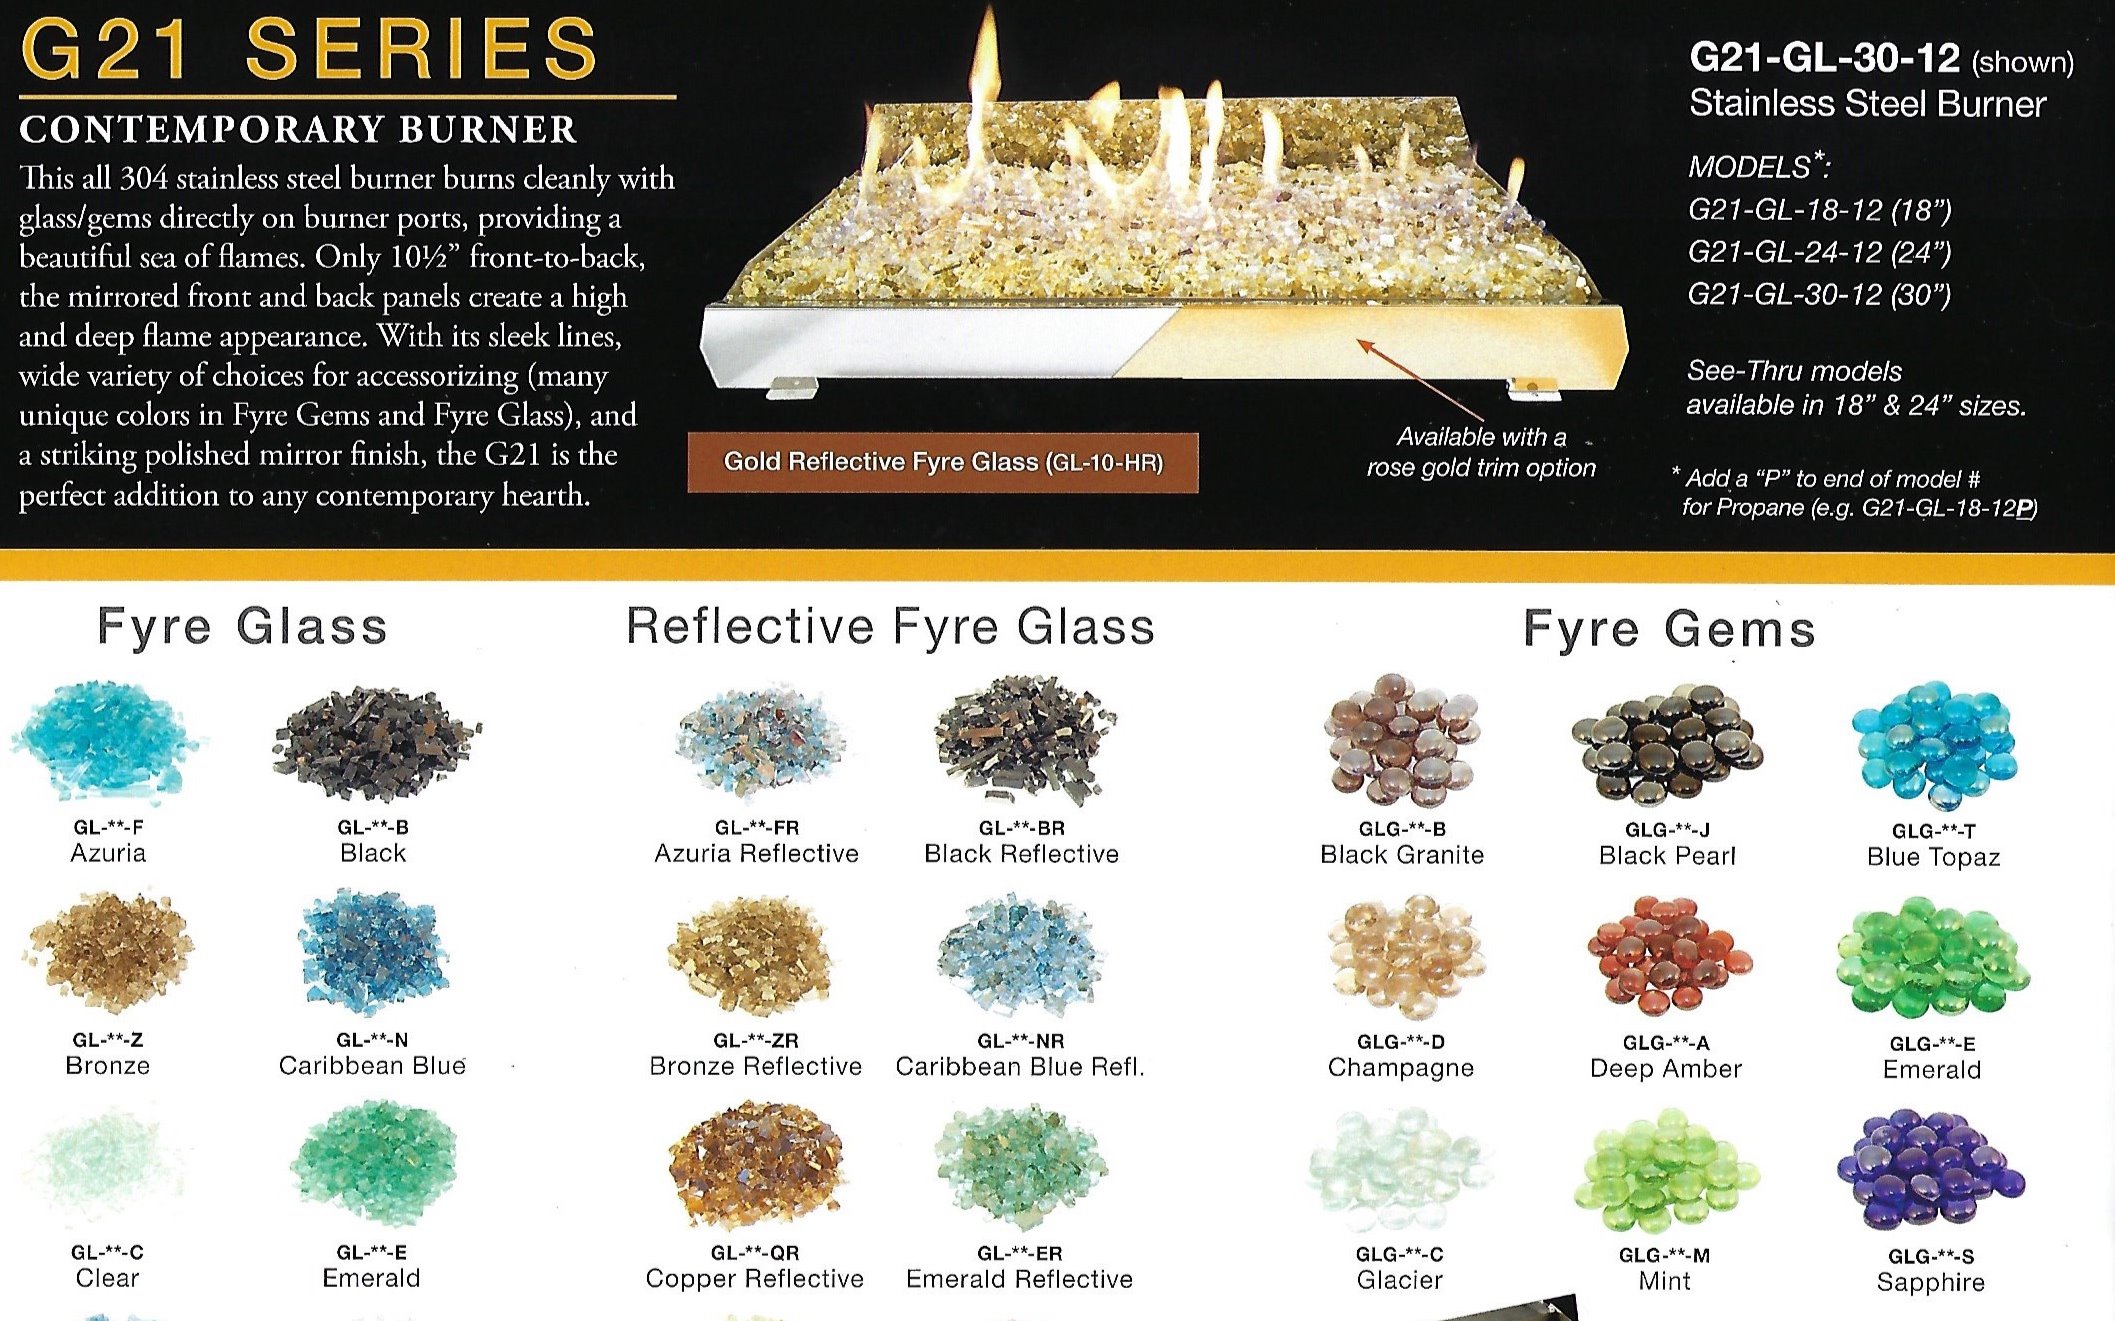 Premium Vented & Vent-free gas logs, traditional or contemporary glass burners. Variety of colors & optional features.